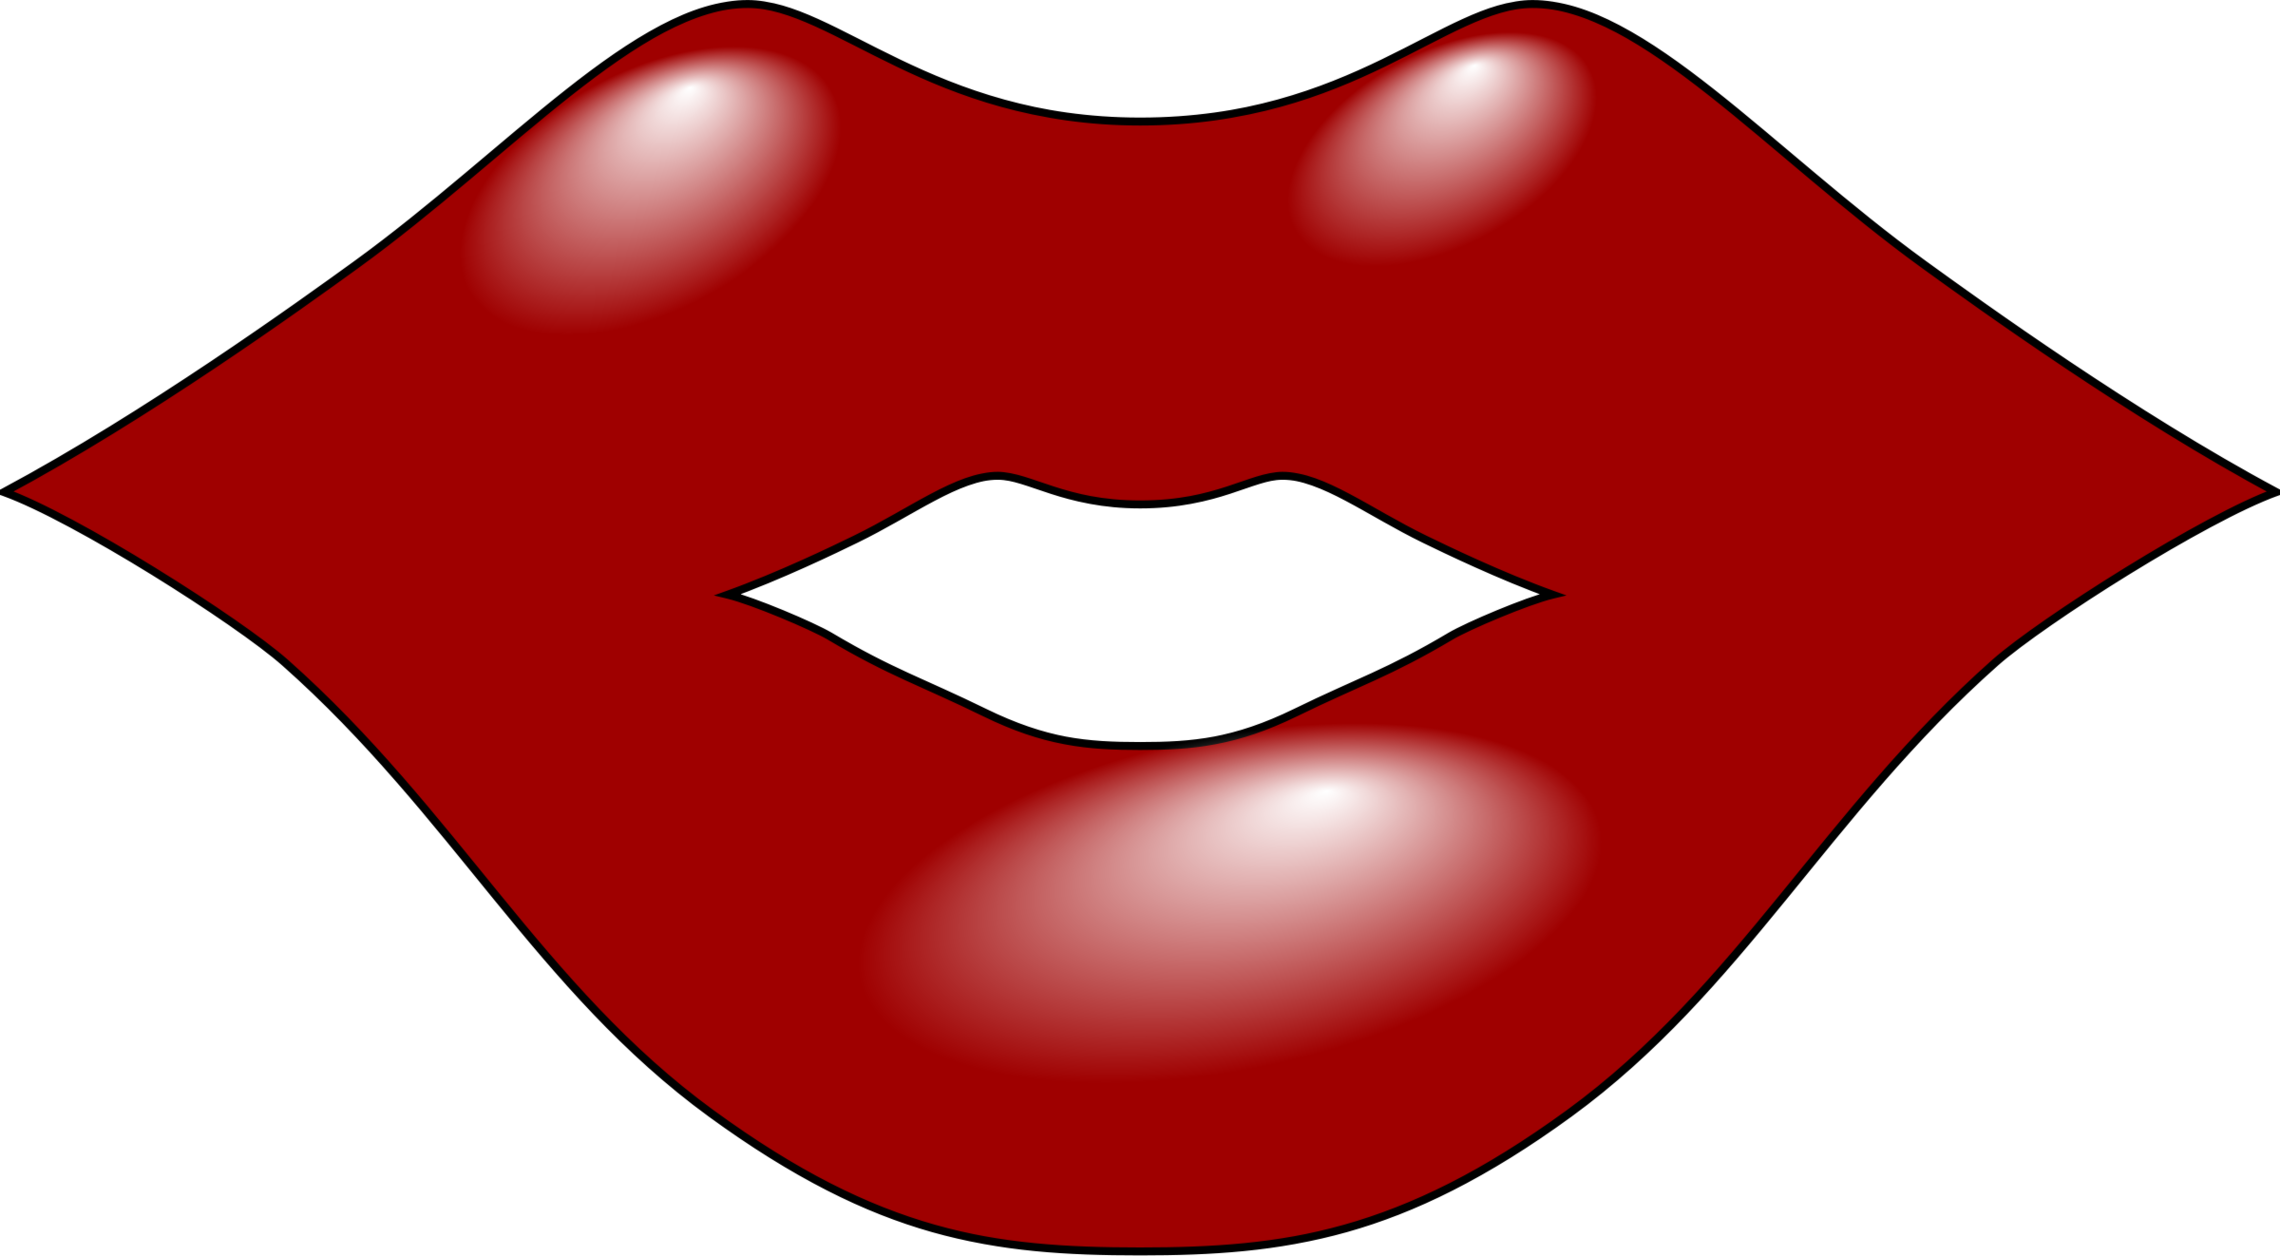 Free Closed Mouth Cliparts, Download Free Clip Art, Free.